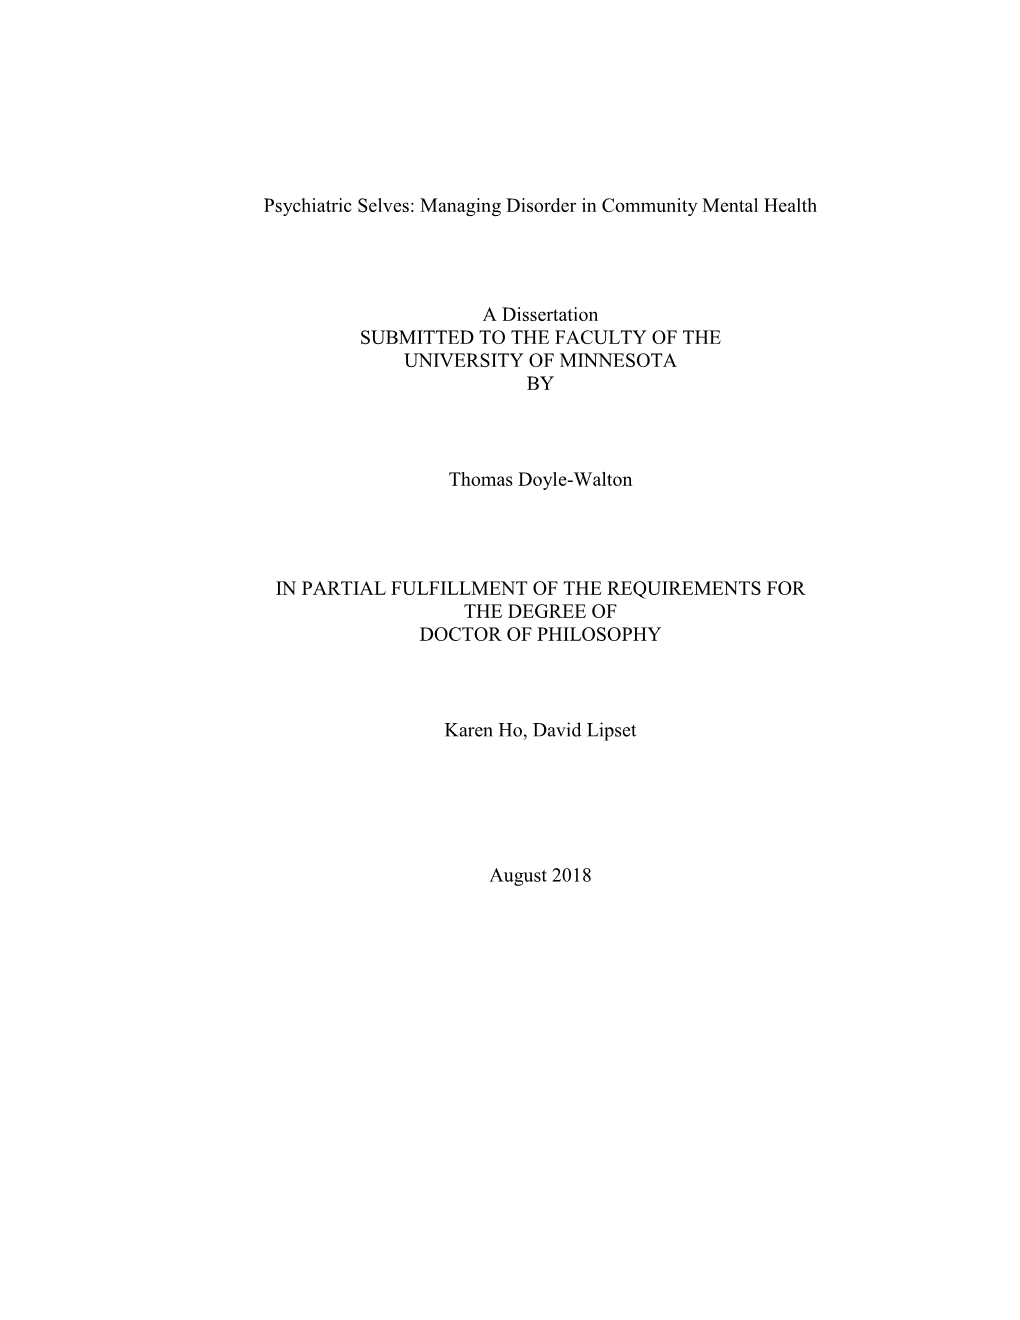 Psychiatric Selves: Managing Disorder in Community Mental Health a Dissertation SUBMITTED to the FACULTY of the UNIVERSITY of MI